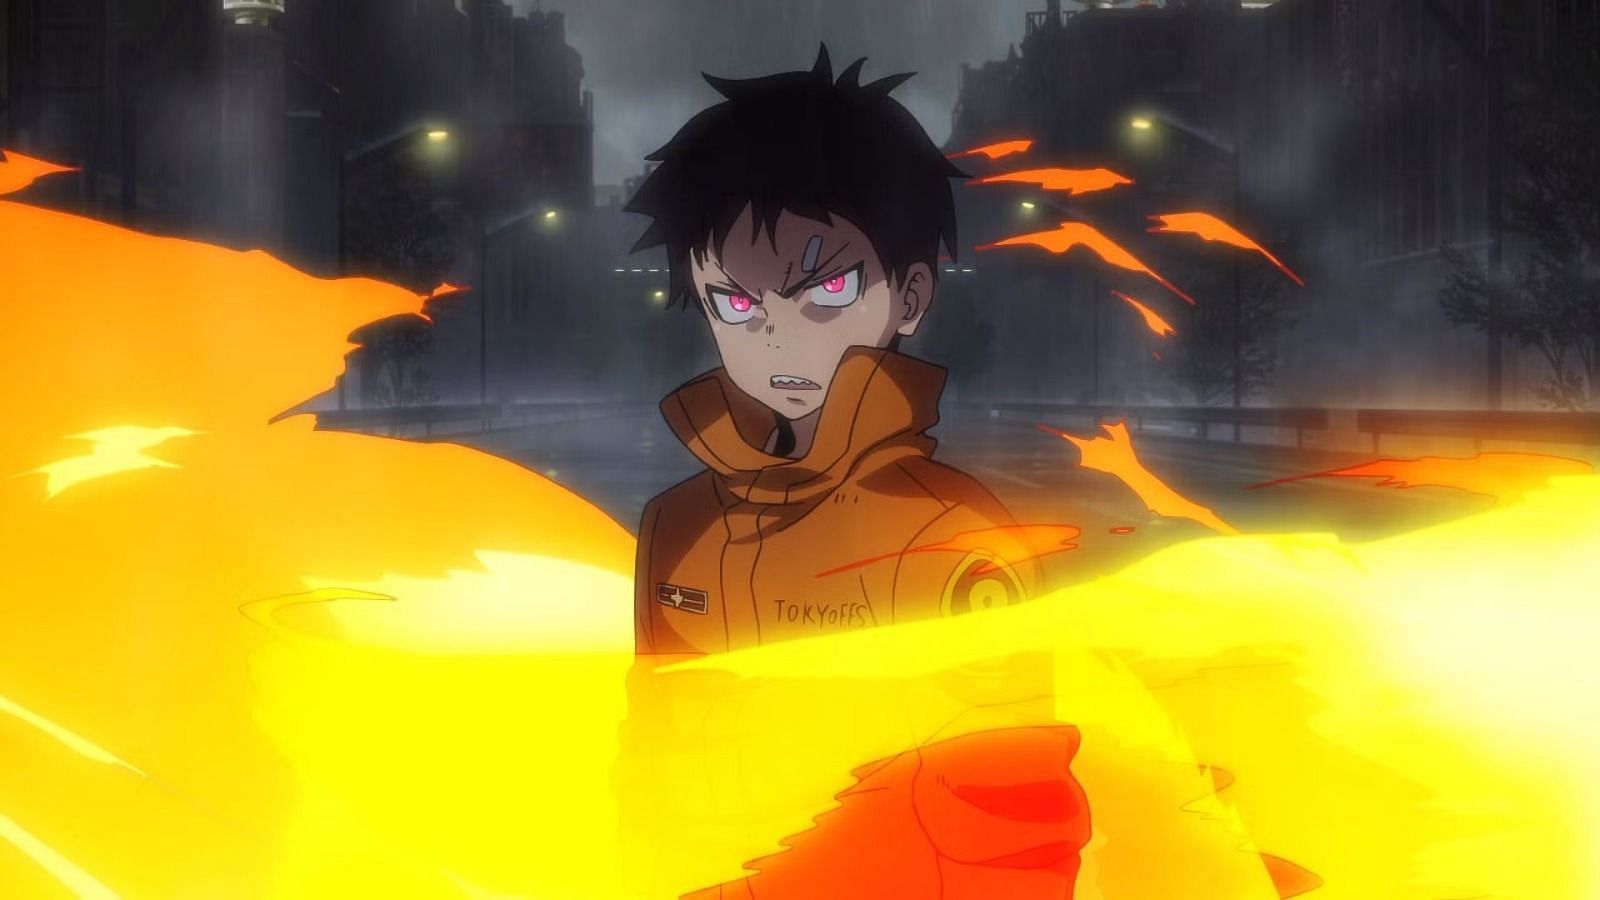 Fire Force season 2: Where does the anime leave off in the manga